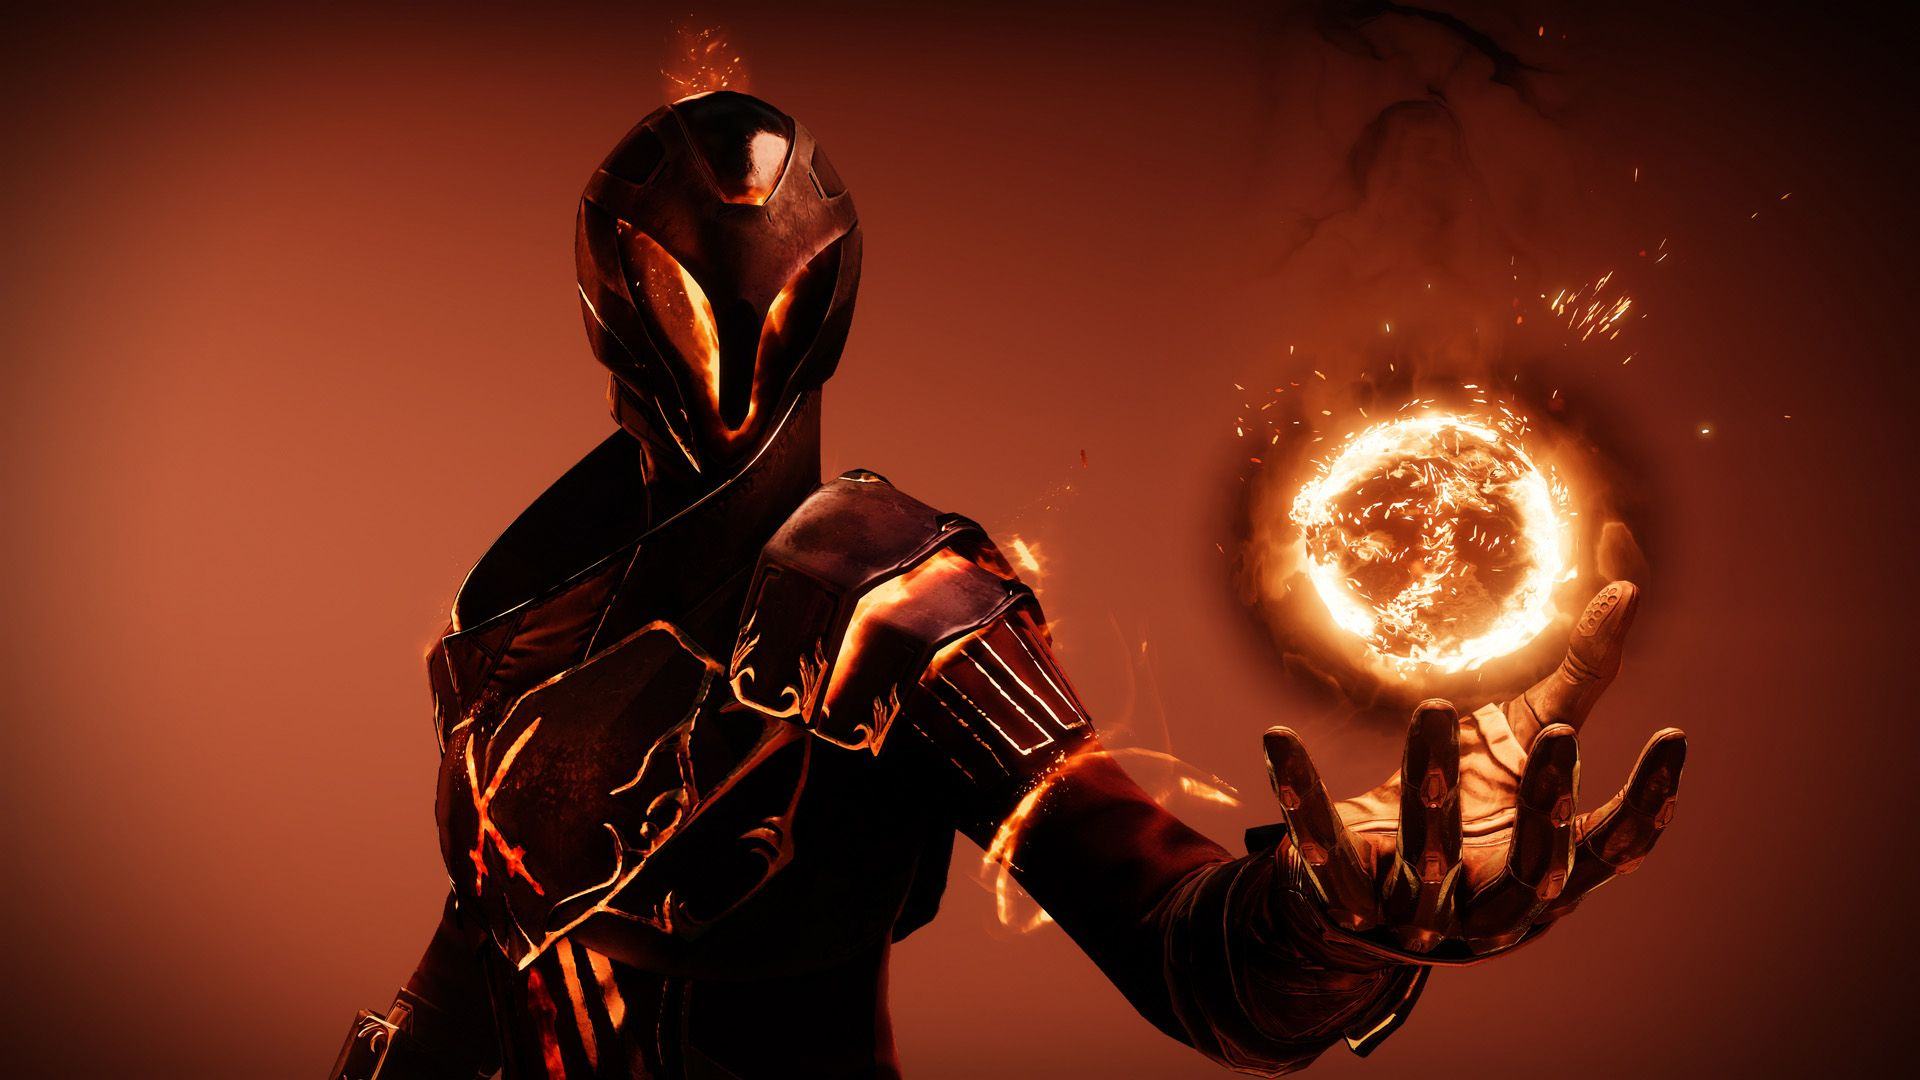 A Warlock Destiny 2 wearing a solar armor raises one hand and hovering above their palm is a solar orb.